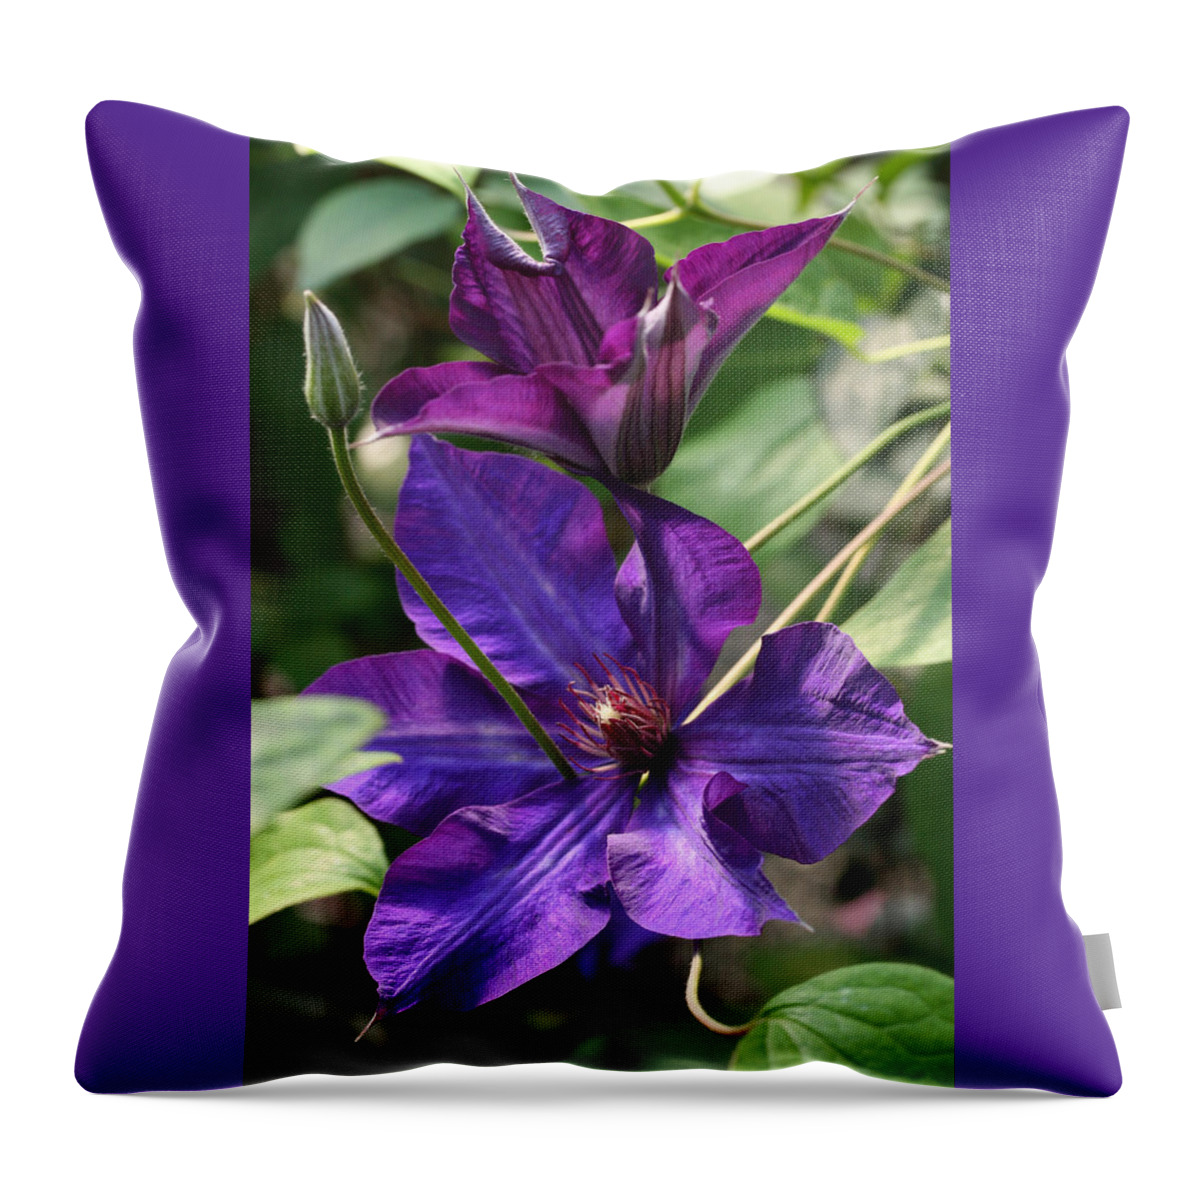 Abundant Throw Pillow featuring the photograph Black Tea Clematis by Tammy Pool